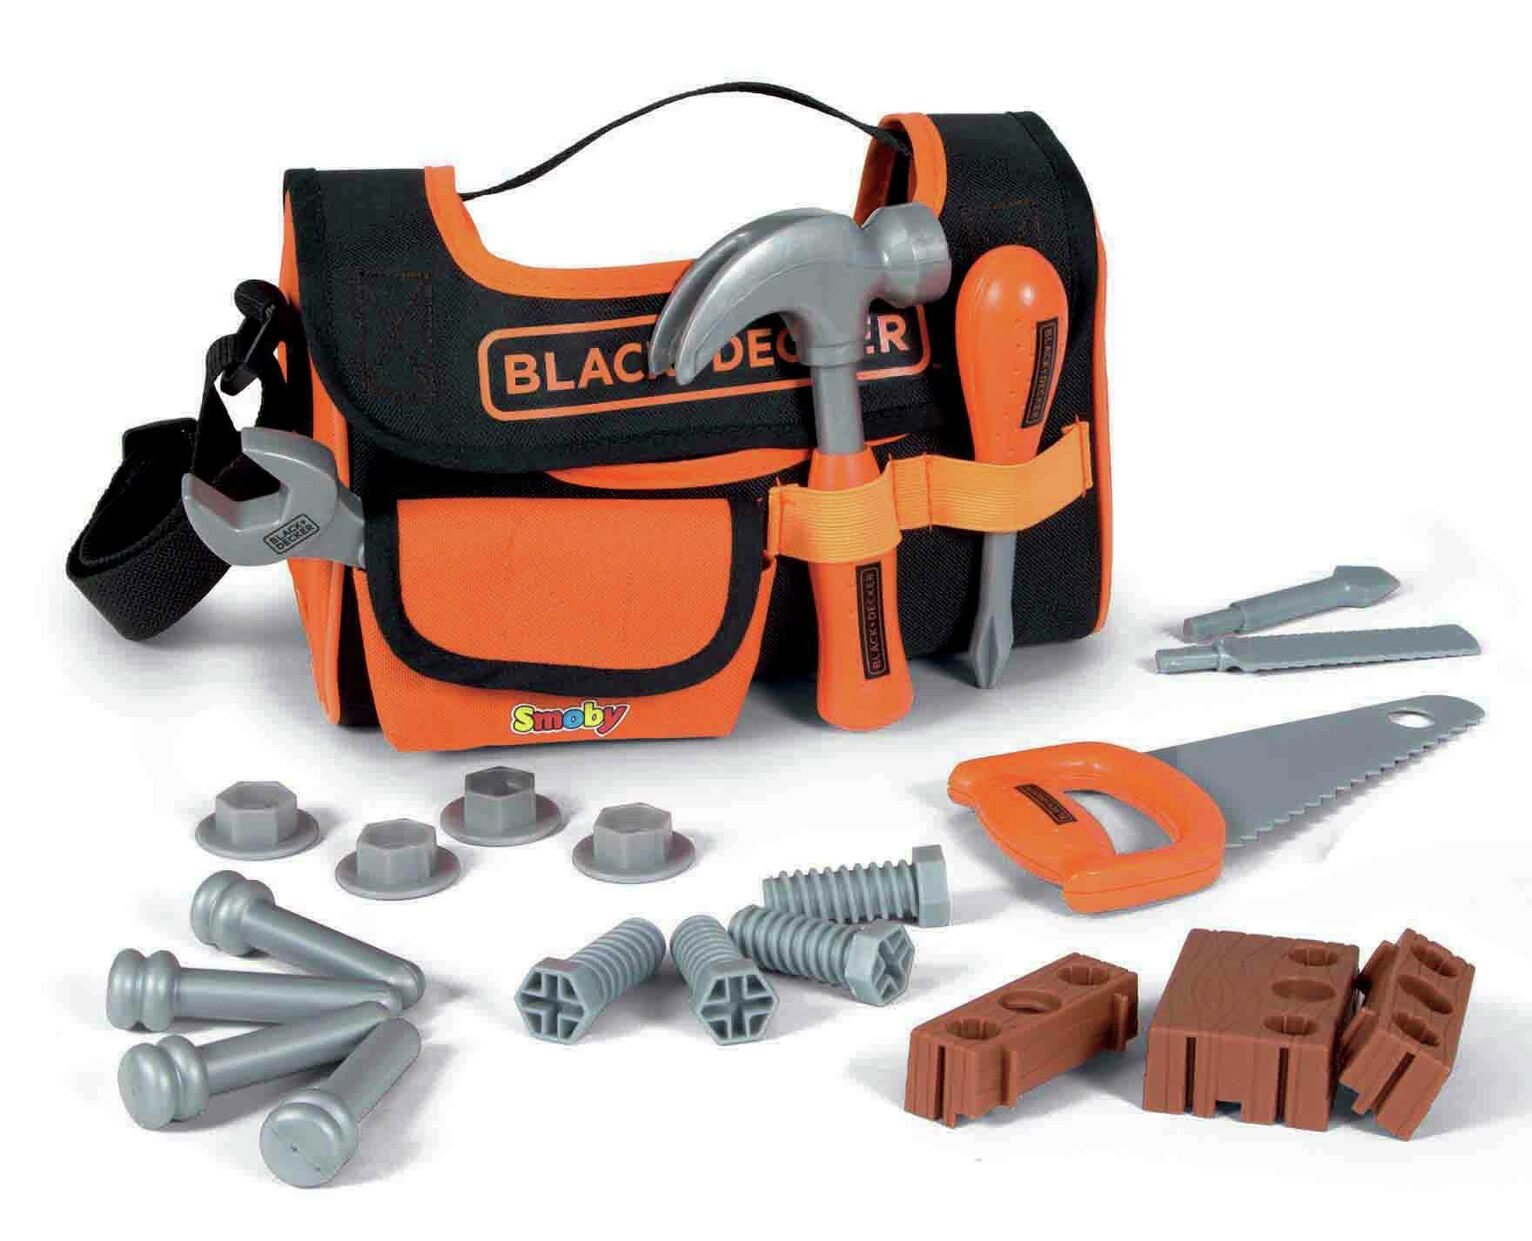 Smoby Toy Black + Decker Tool Case review